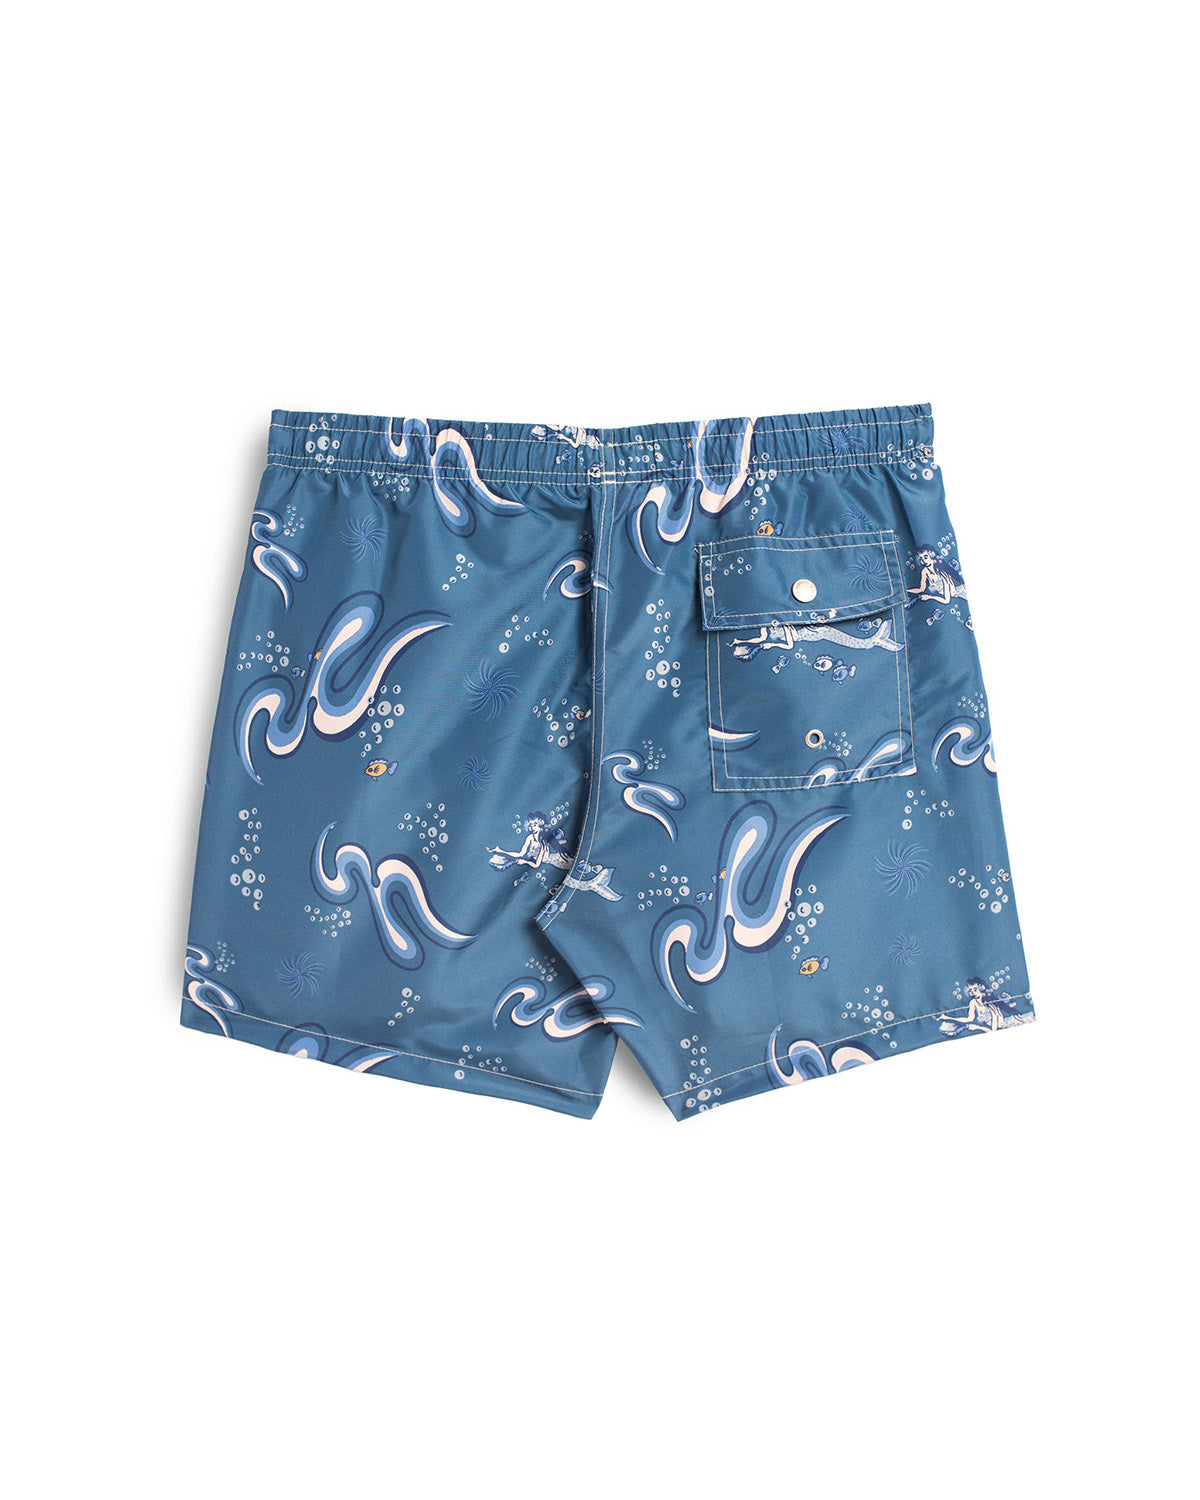 Back view of Bather swim trunk with siren pattern 